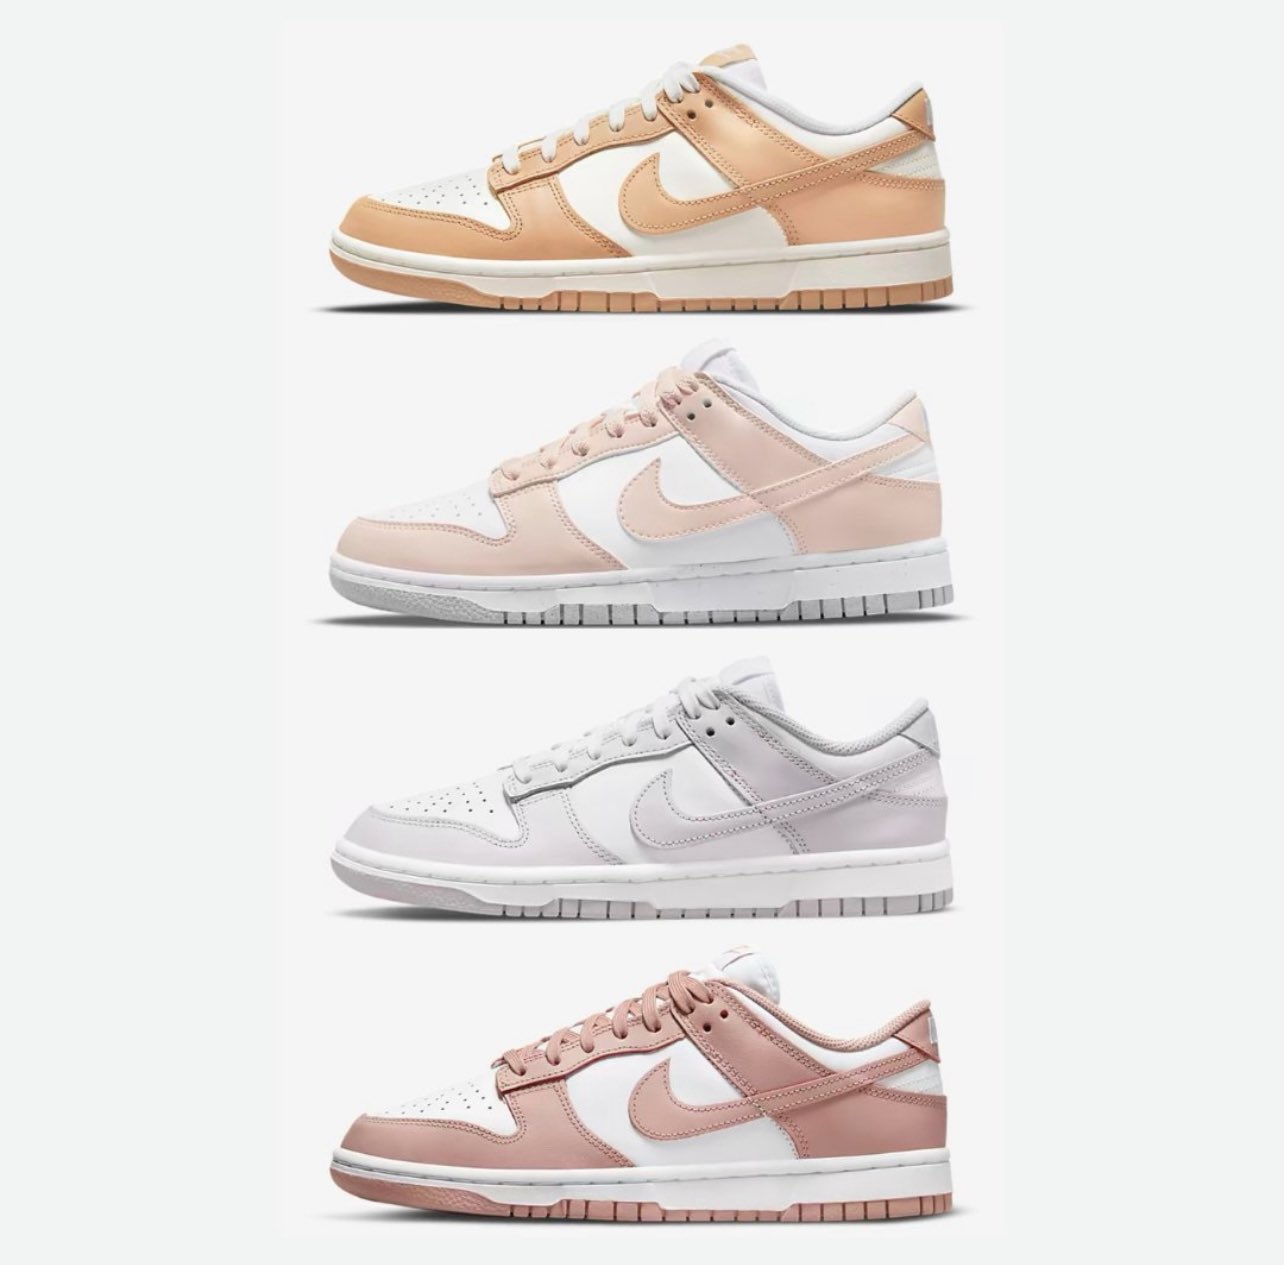 SNKRS STOCK on X: "Dunks at 10am ET Dunk low “Harvest moon “ Pushed to 9/3  *Top pair* Dunk low next nature “ white / pale coral”  https://t.co/3LXhqQiKxB TT STOCK = 4K